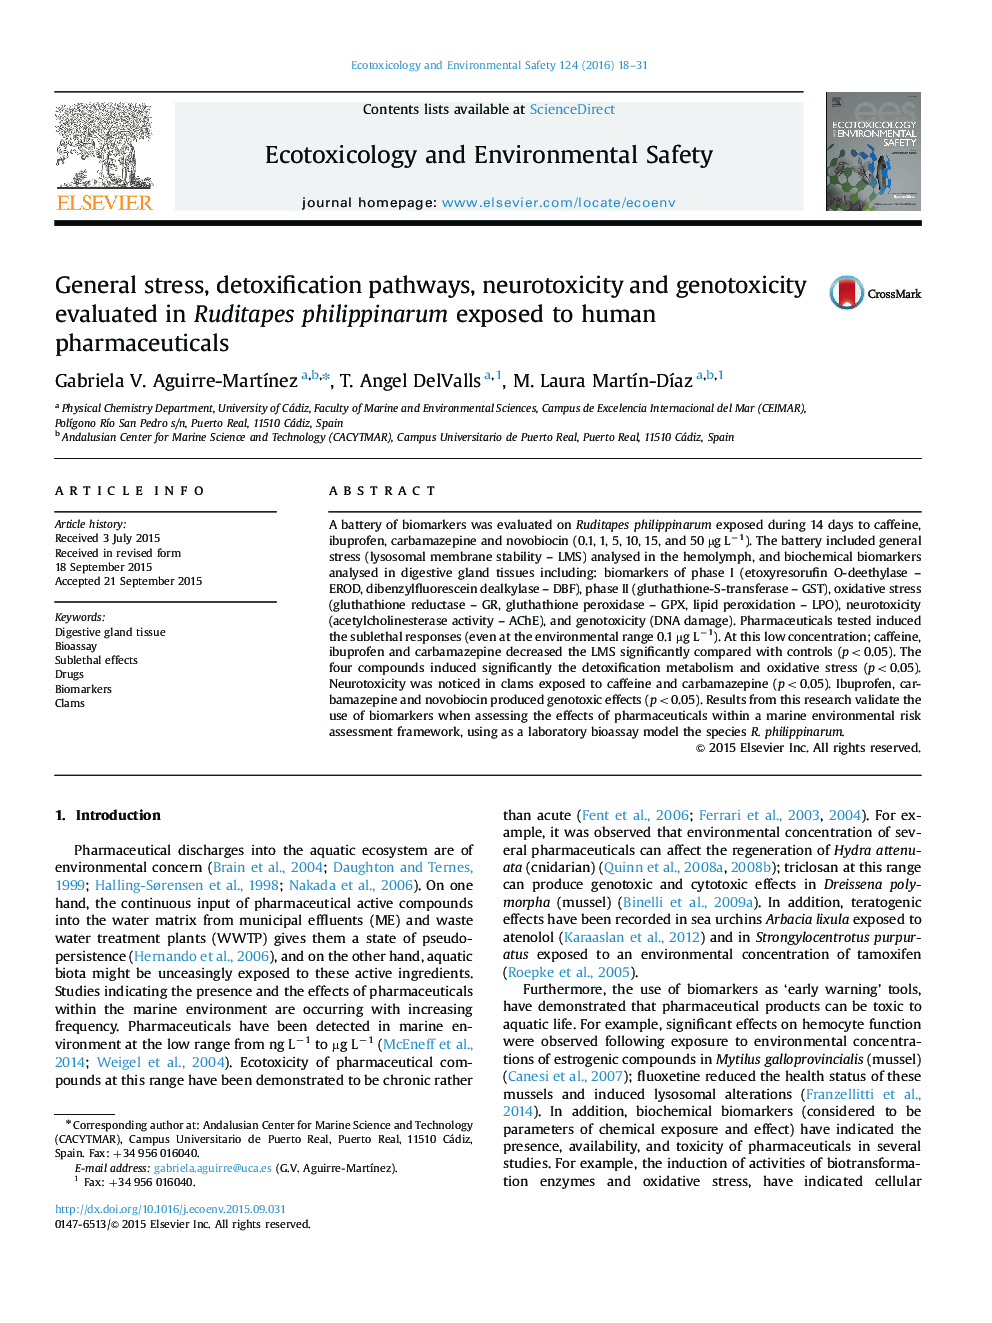 General stress, detoxification pathways, neurotoxicity and genotoxicity evaluated in Ruditapes philippinarum exposed to human pharmaceuticals